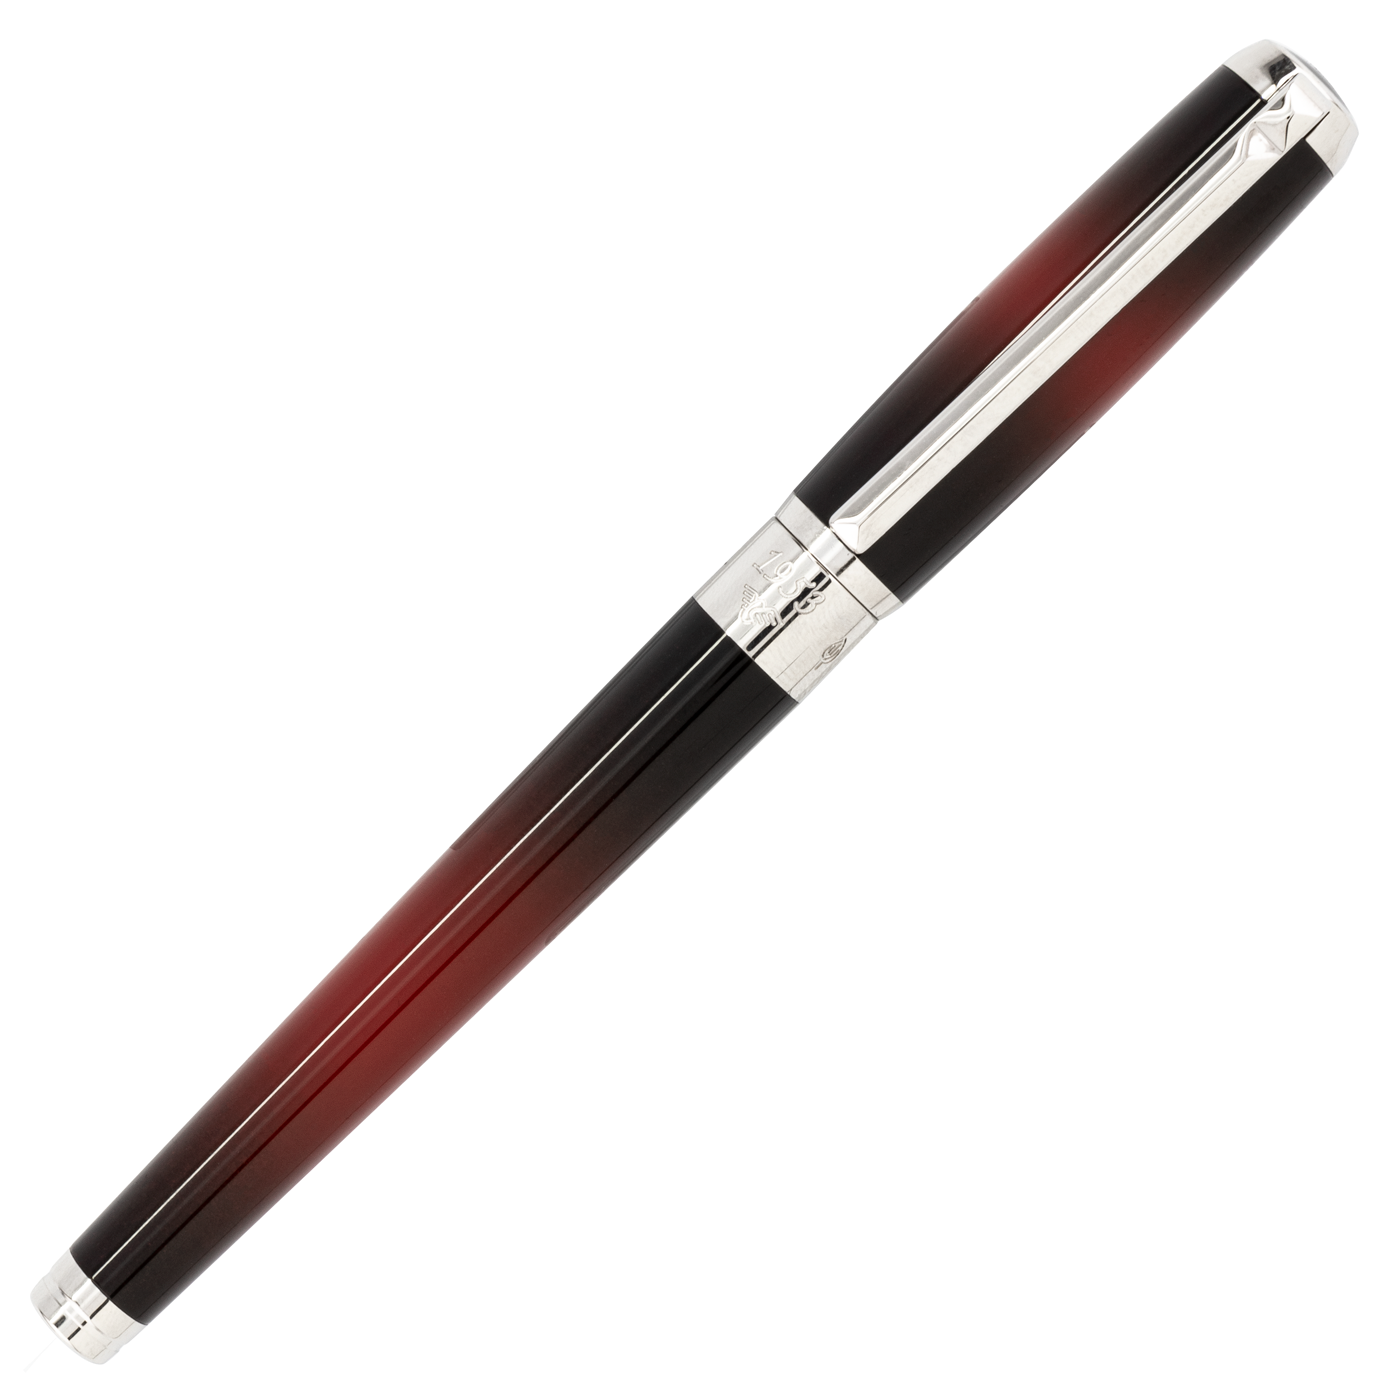 St Dupont Pens are made in France  are well know in the Luxury pen market. These pens are constructed of the highest quality using the finest materials. 